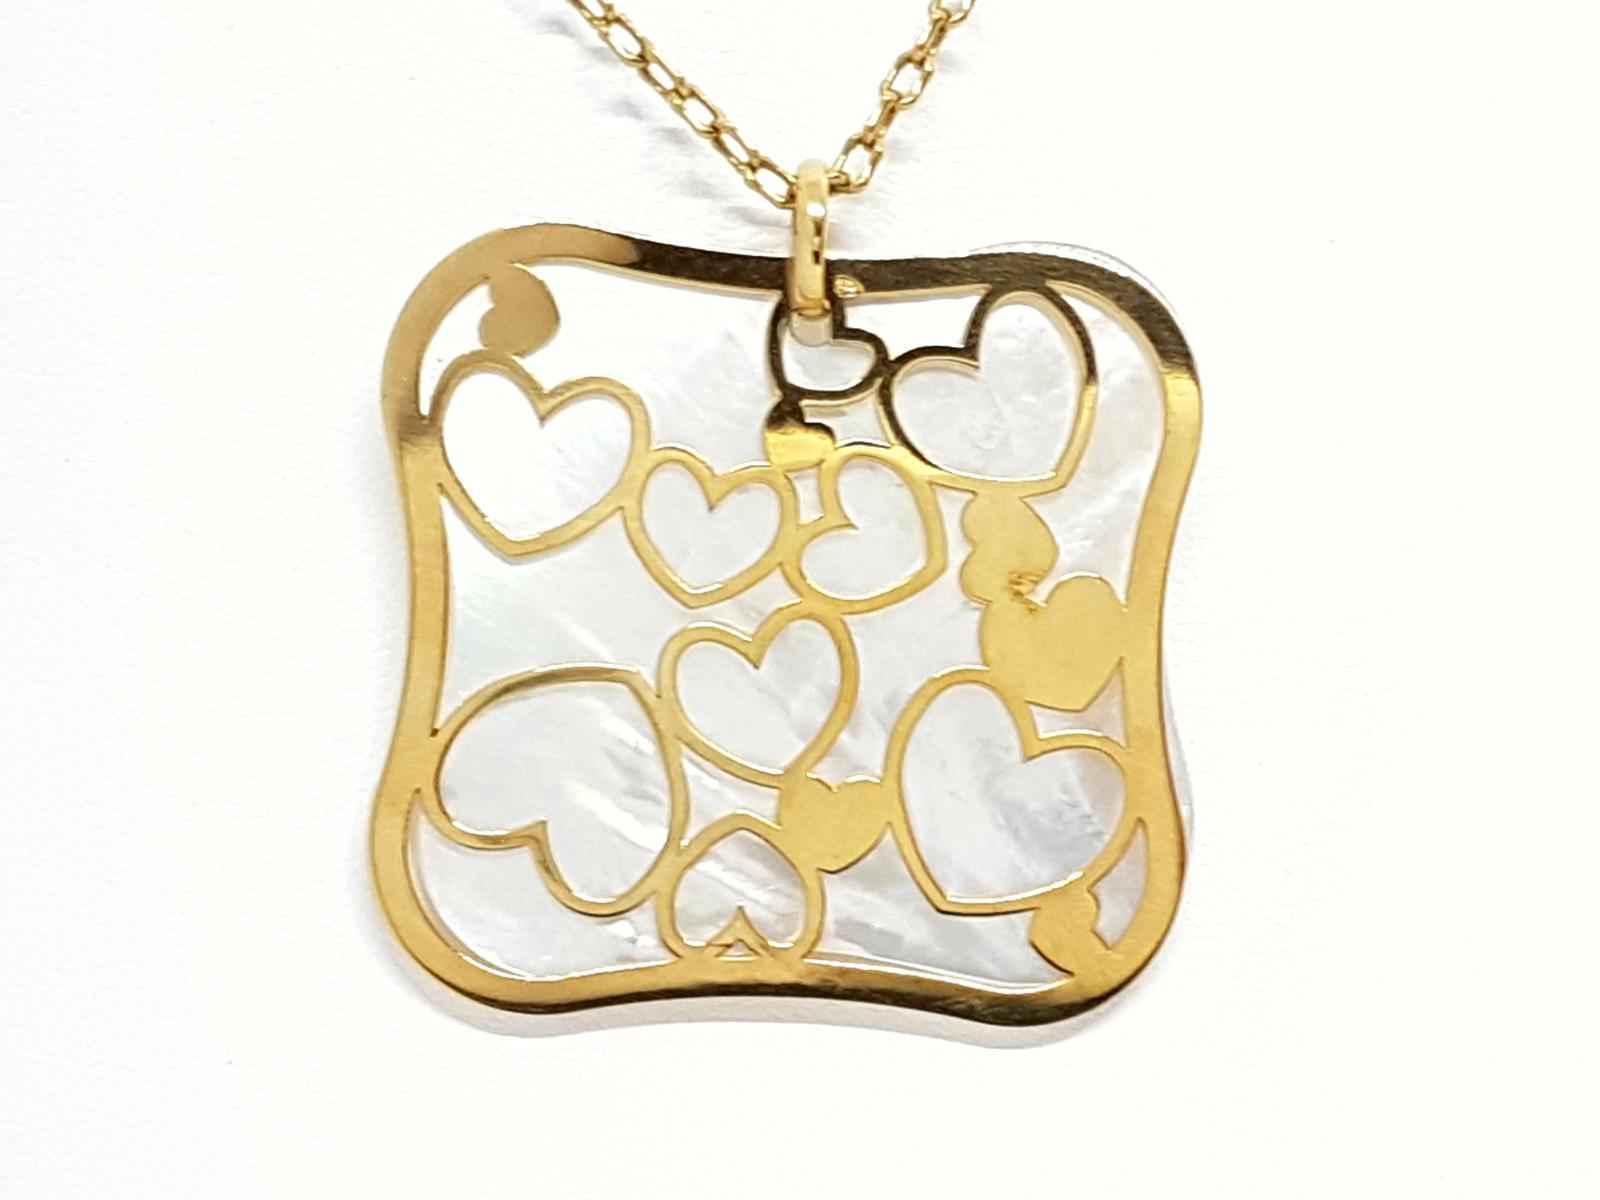 Chain with pendant 18K yellow gold. pendant hearts and reasons nacre. 4.8 cm x 4.8 cm. chain length: 63 cm. eagle punch head. Weight: 19.45 g. excellent condition
